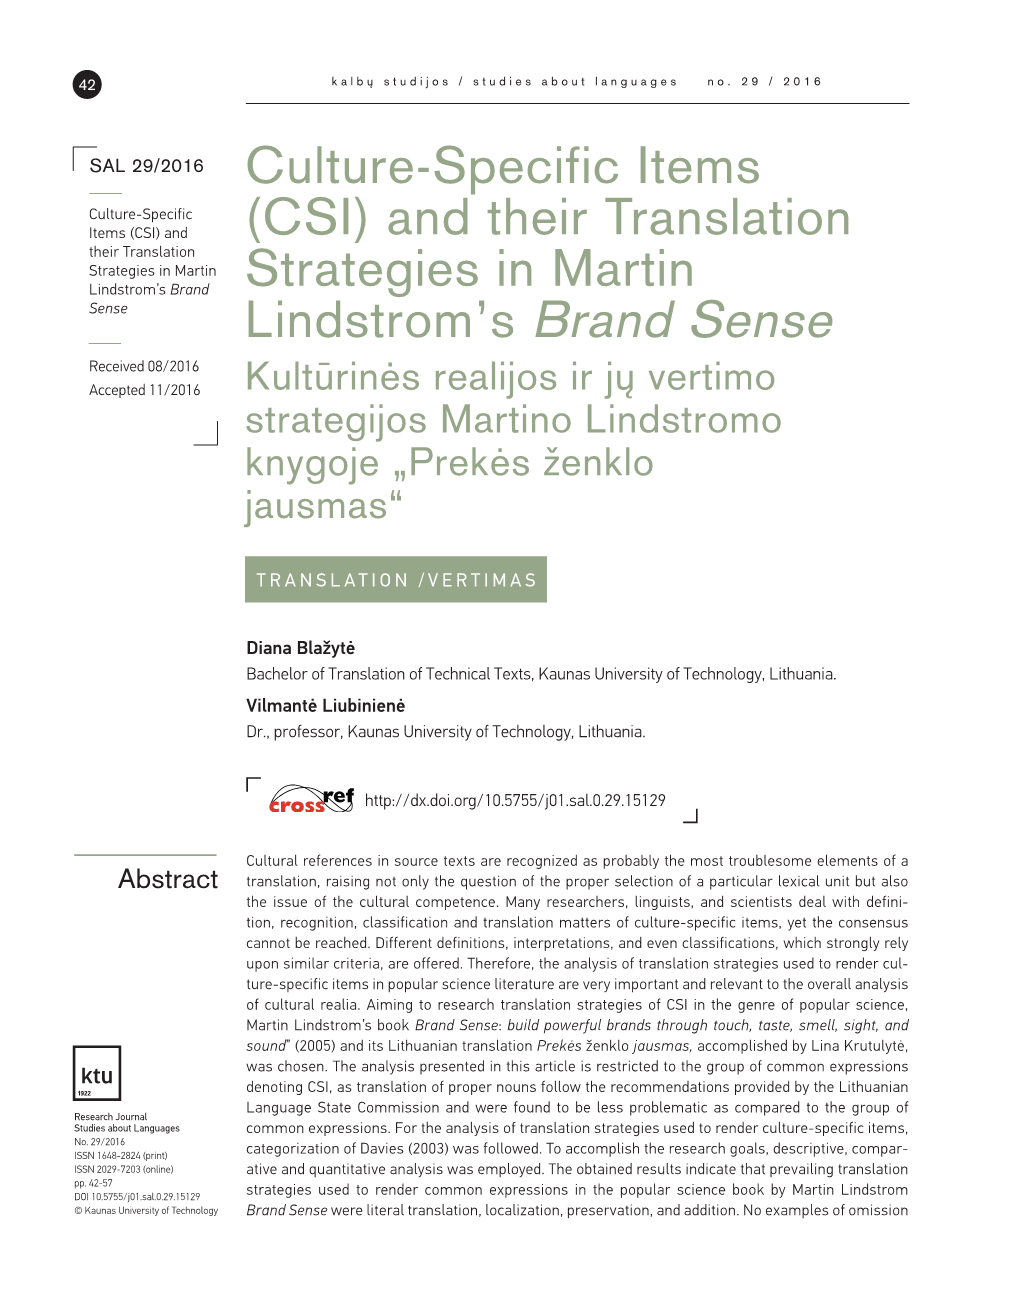 Culture-Specific Items (CSI) and Their Translation Strategies in Martin